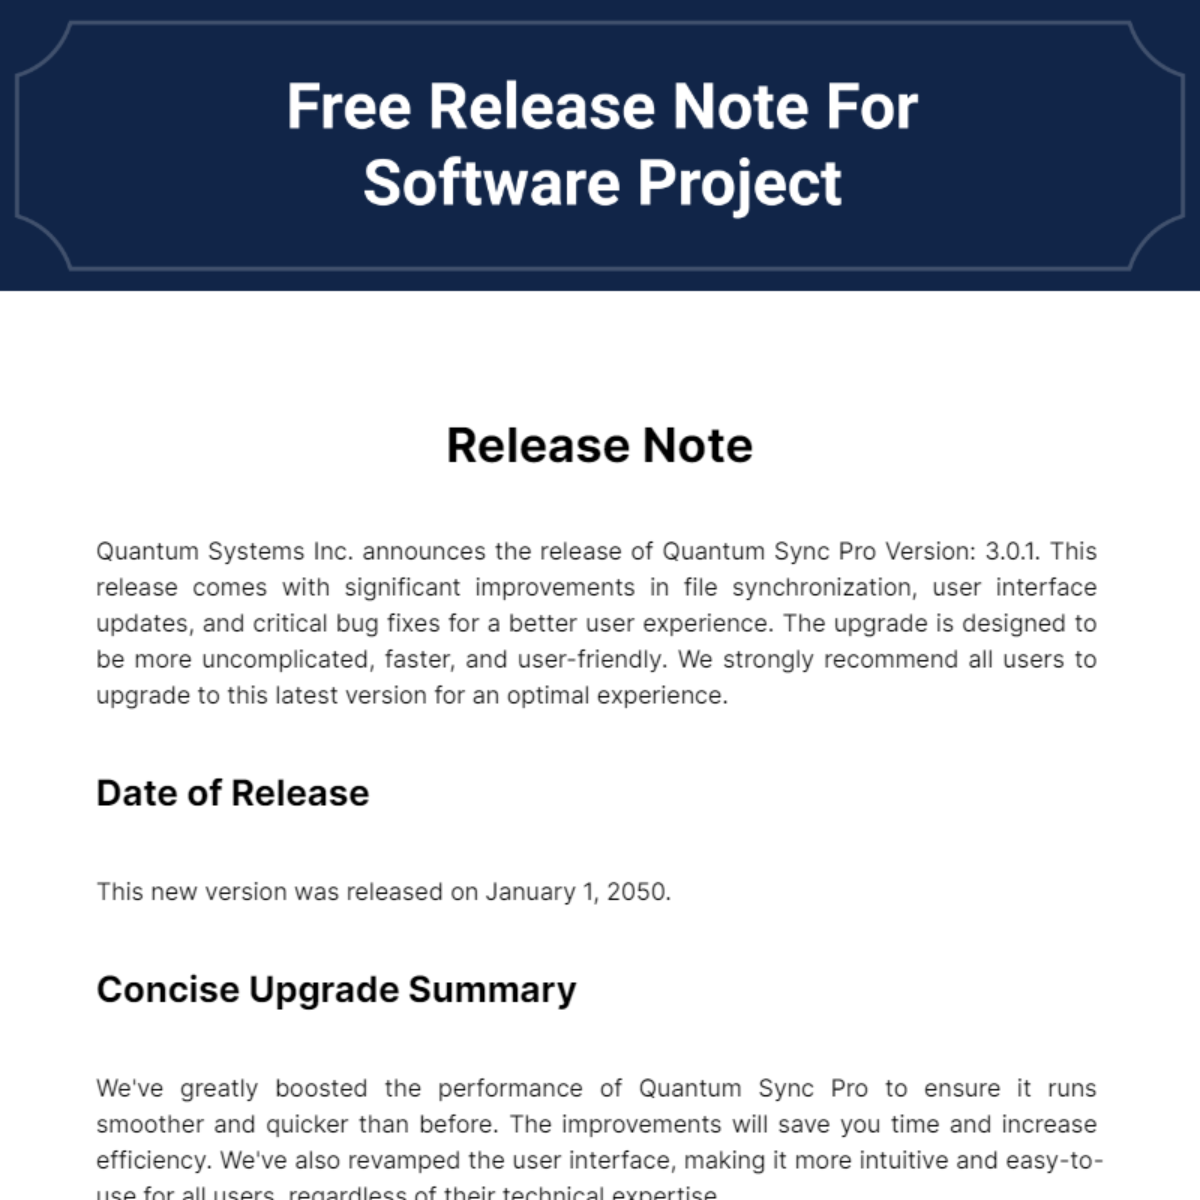 Release Note For Software Project Template